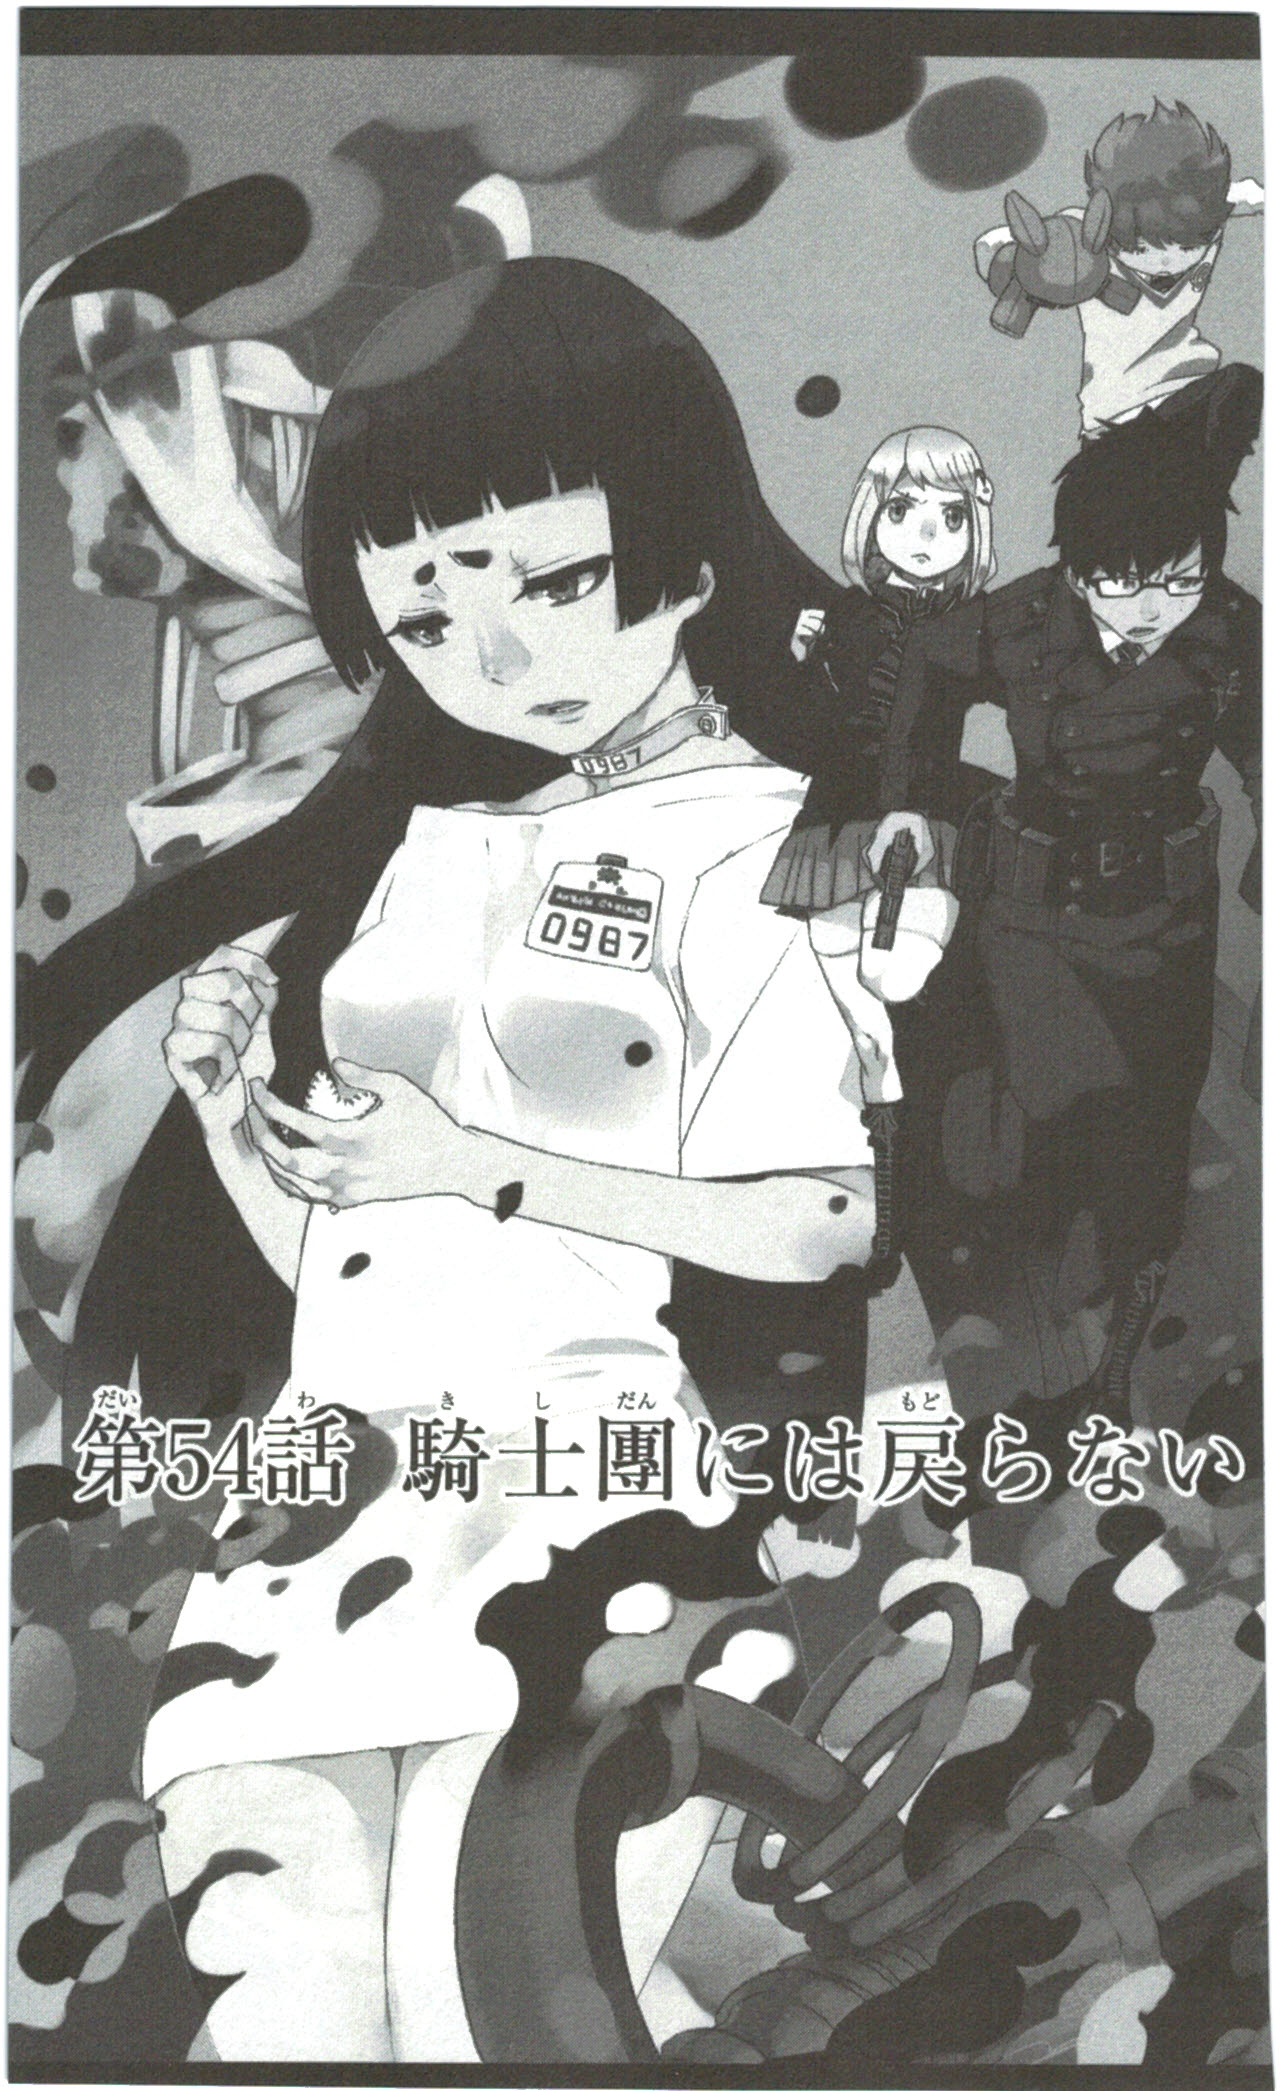 Ao no Exorcist - Chapter 53 - Page 35